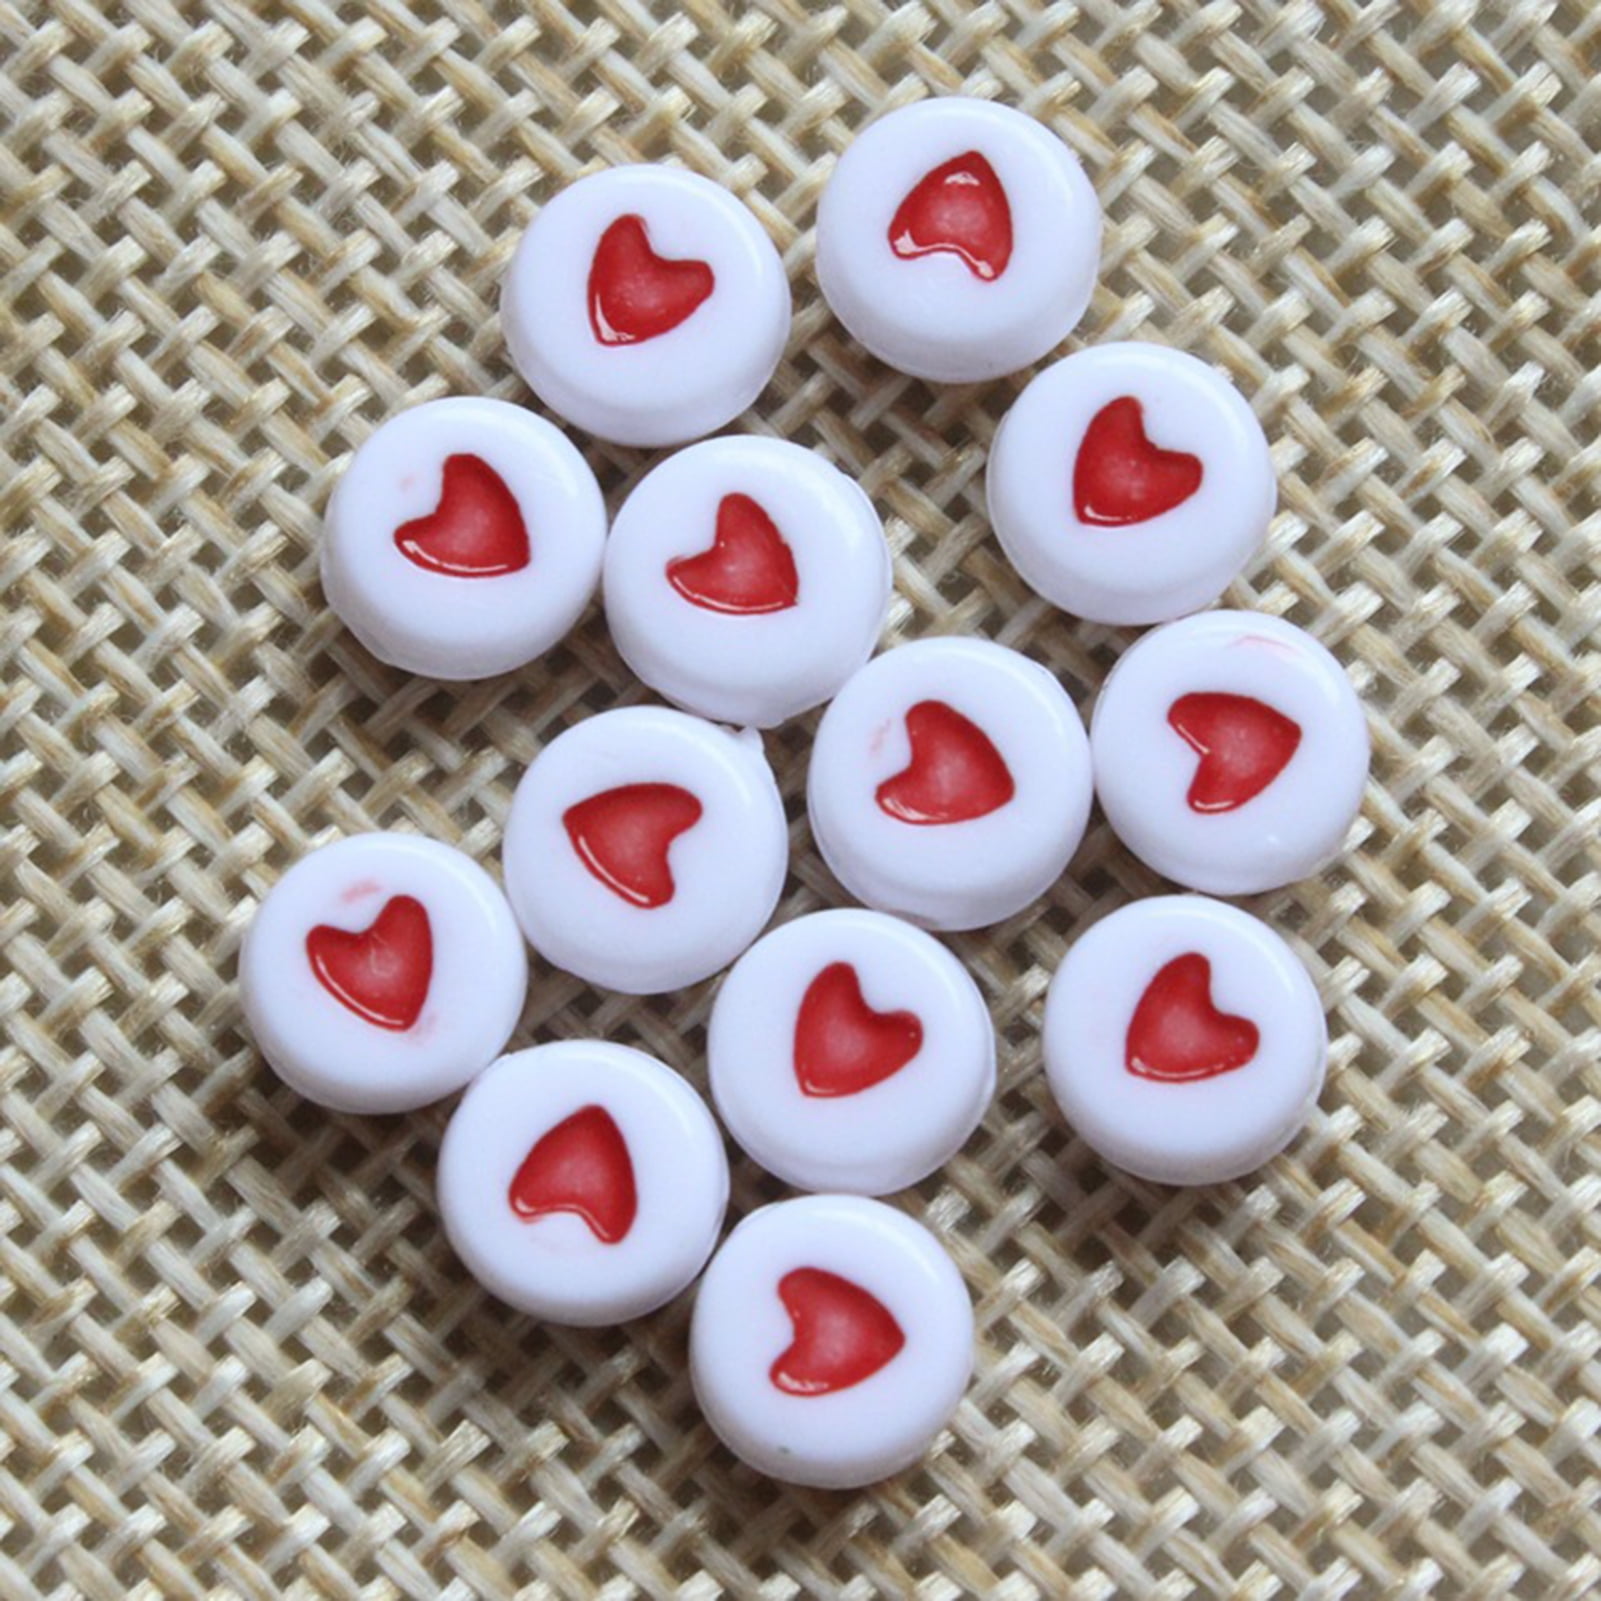  KitBeads 200pcs Black Acrylic White Heart Beads Flat Round Love  Heart Beads Pony Coin Disc Heart Beads for Jewelry Making Bracelets  Necklace Bulk : Arts, Crafts & Sewing